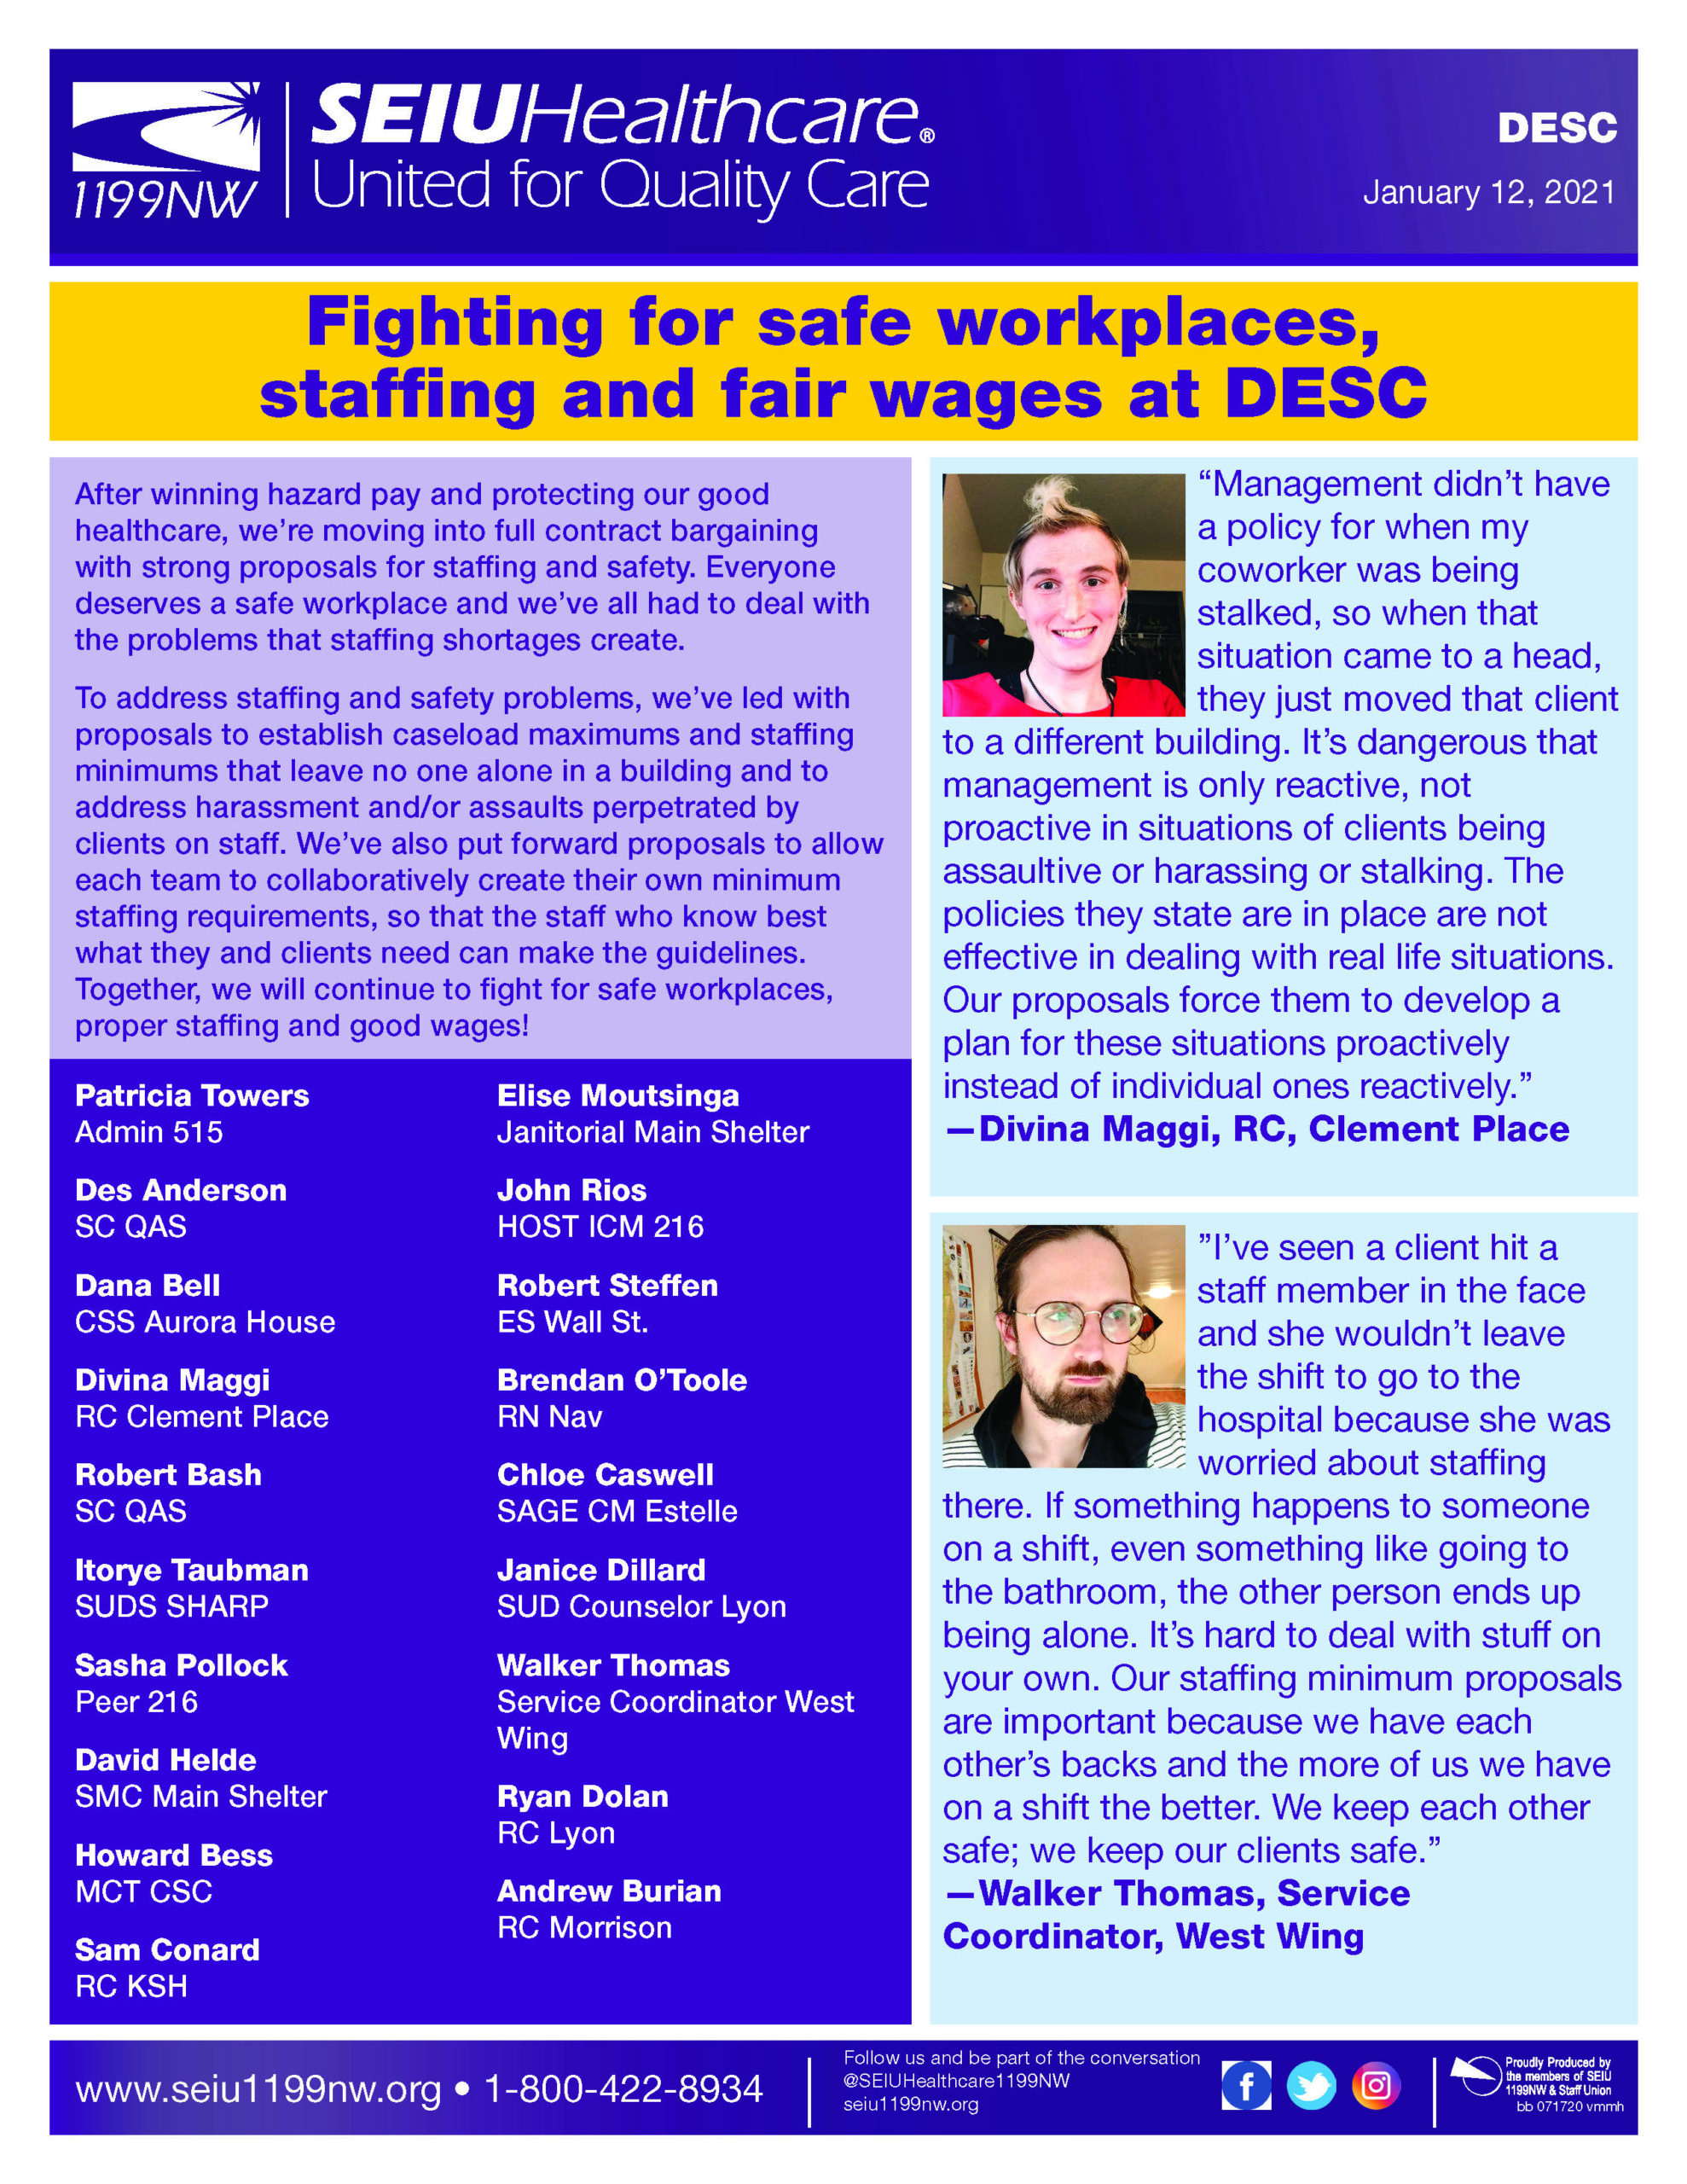 Fighting for safe workplaces, staffing and fair wages at DESC